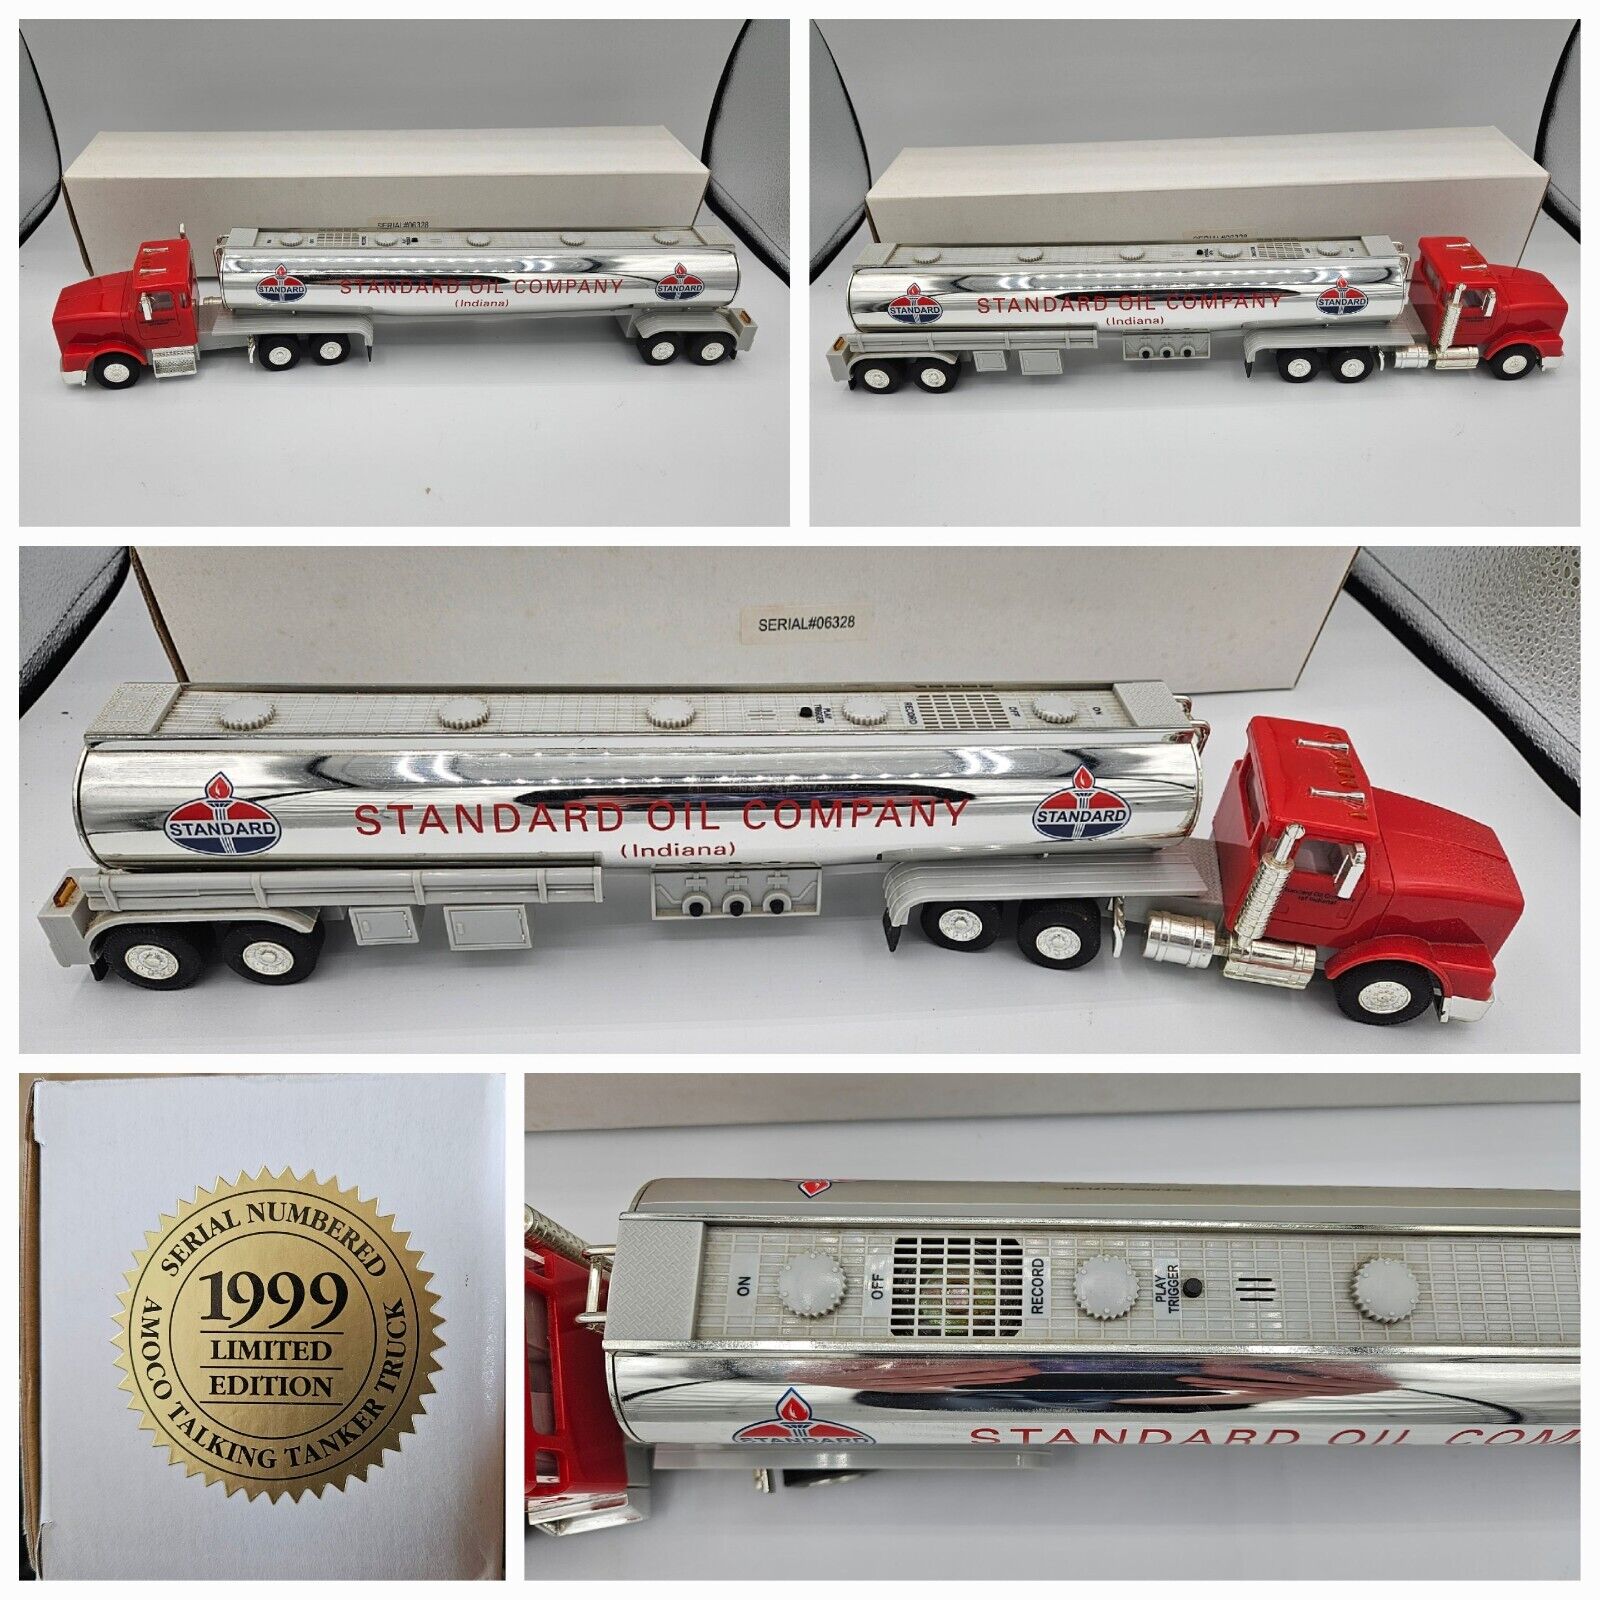 Amoco Talking Tanker Truck 1999 Limited Edition Standard Oil Company Indiana NEW